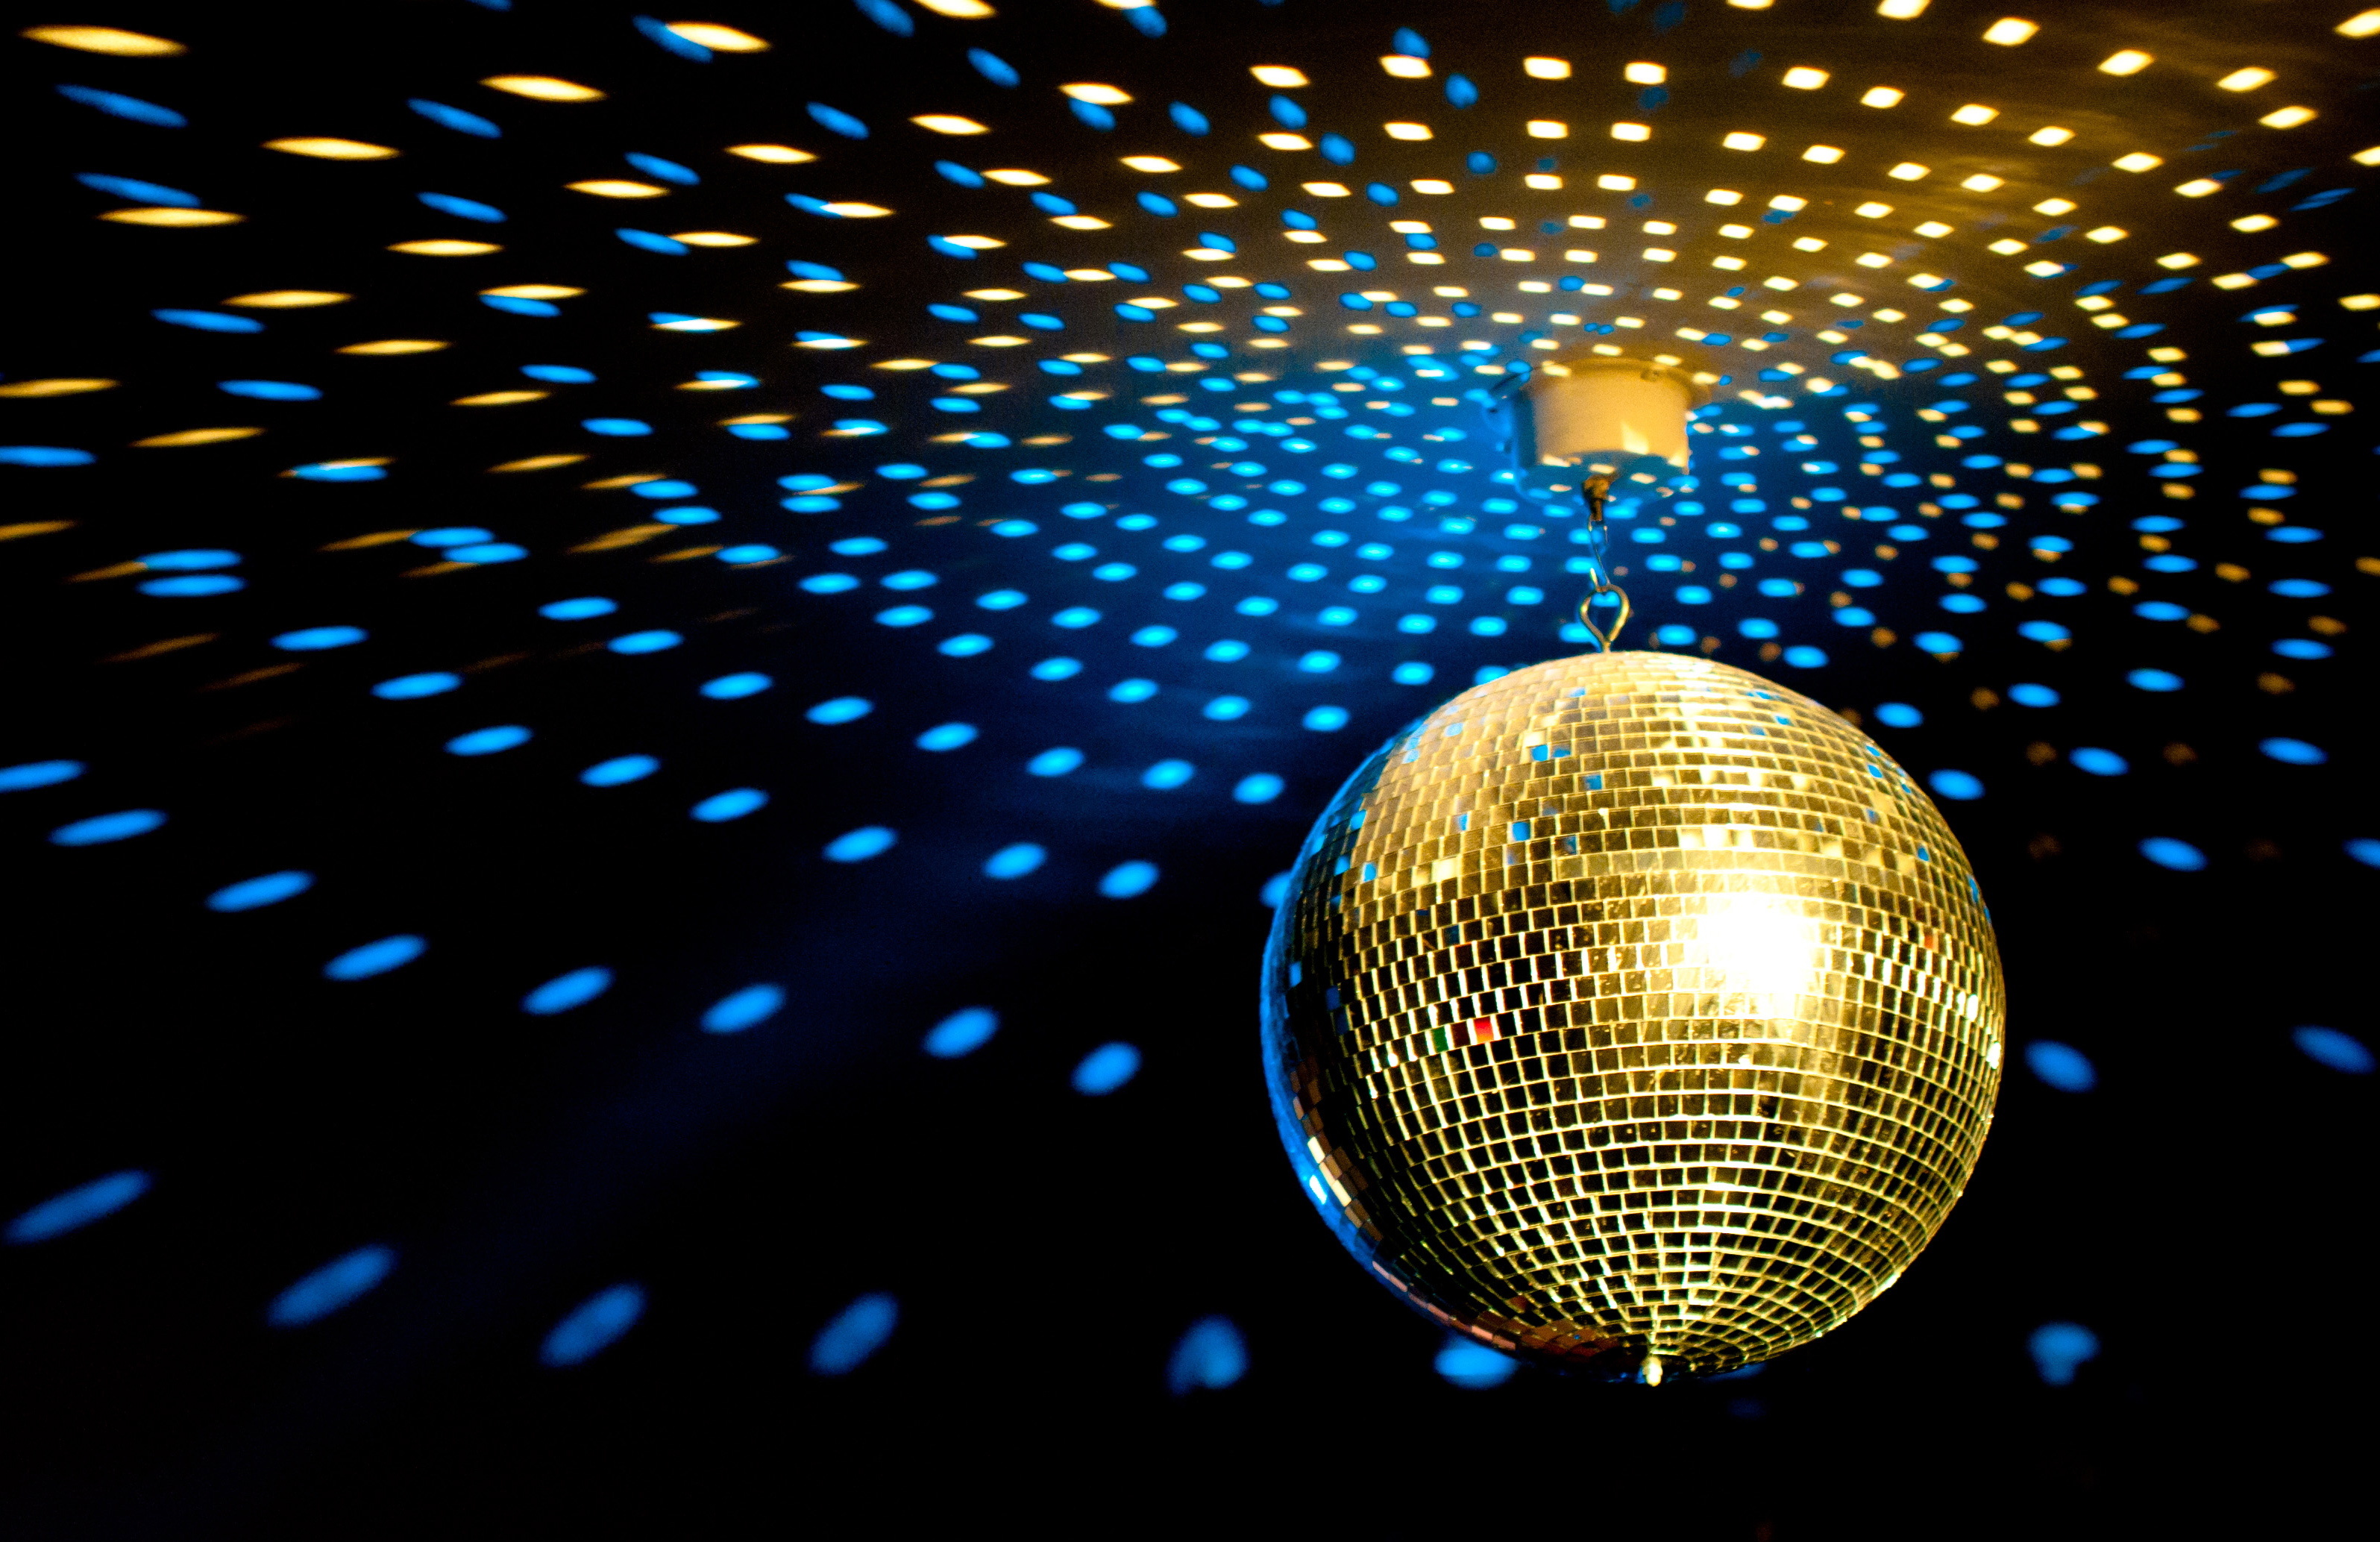 Disco: A ball covered with mirrored facets, Suspended from a ceiling, Rotates to cast reflected light. 3200x2070 HD Wallpaper.